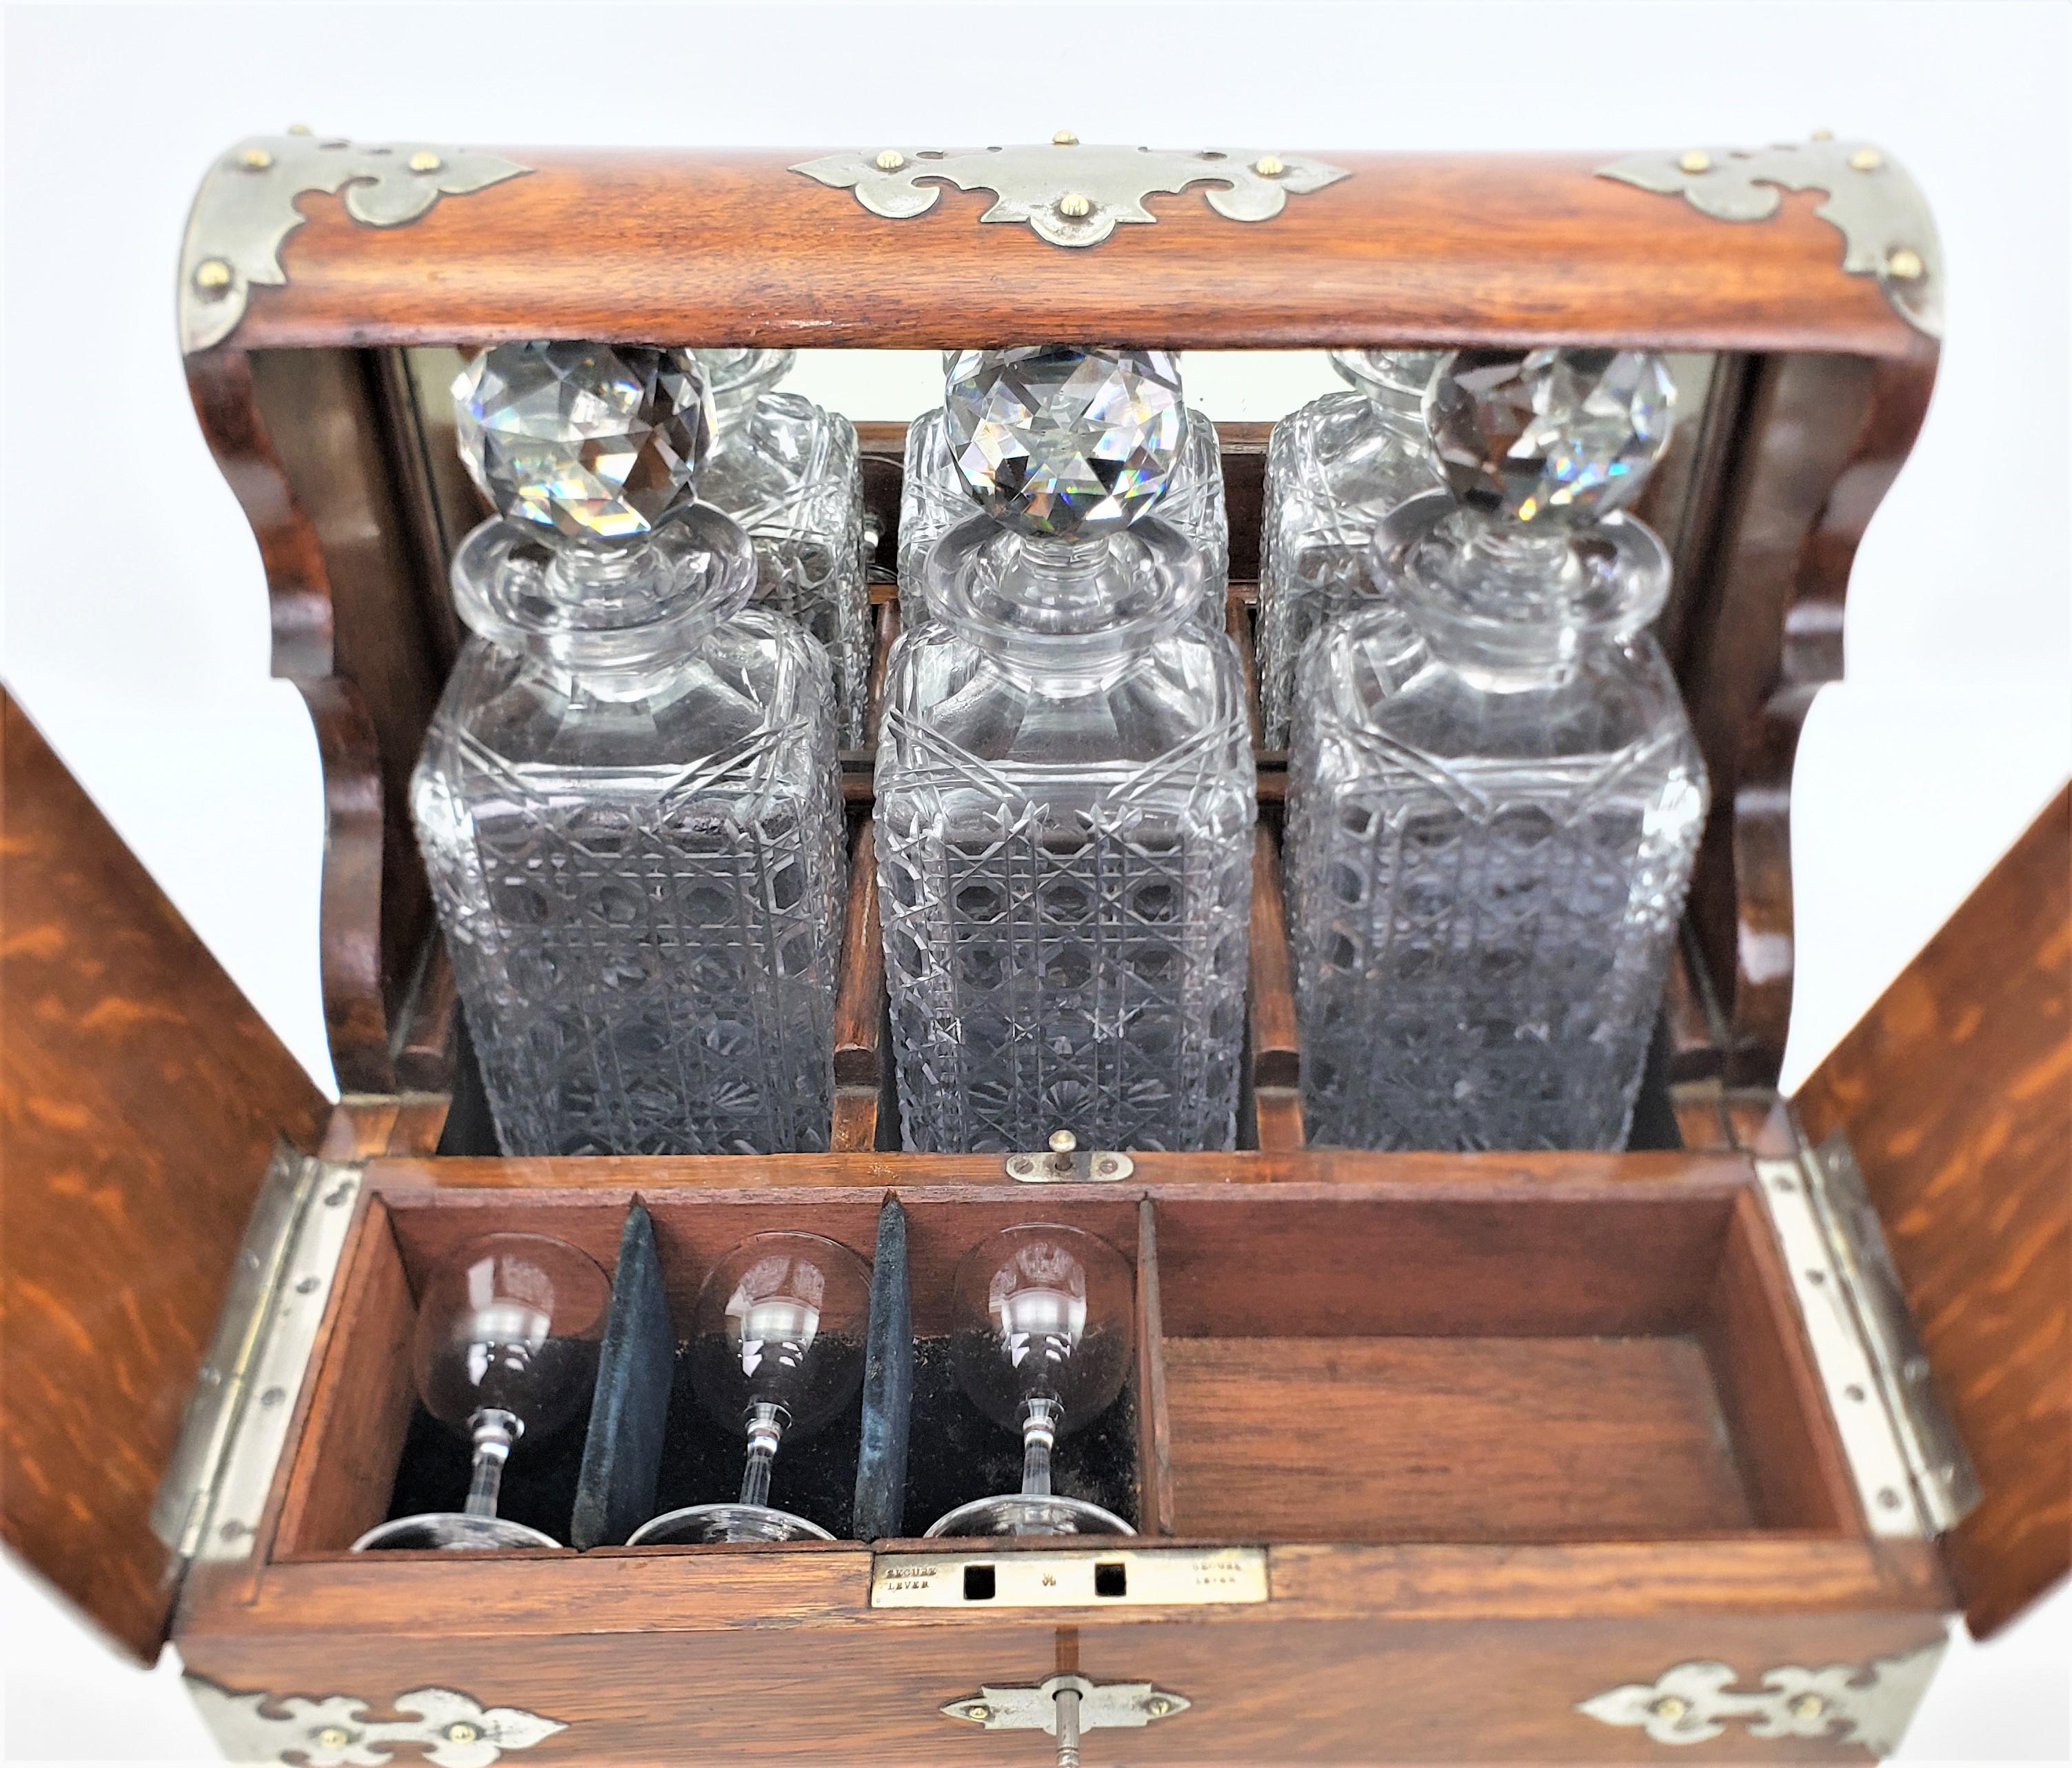 19th Century Antique Oak Tantalus with Ornate Silver Plated Mounts & Games Compendium Set